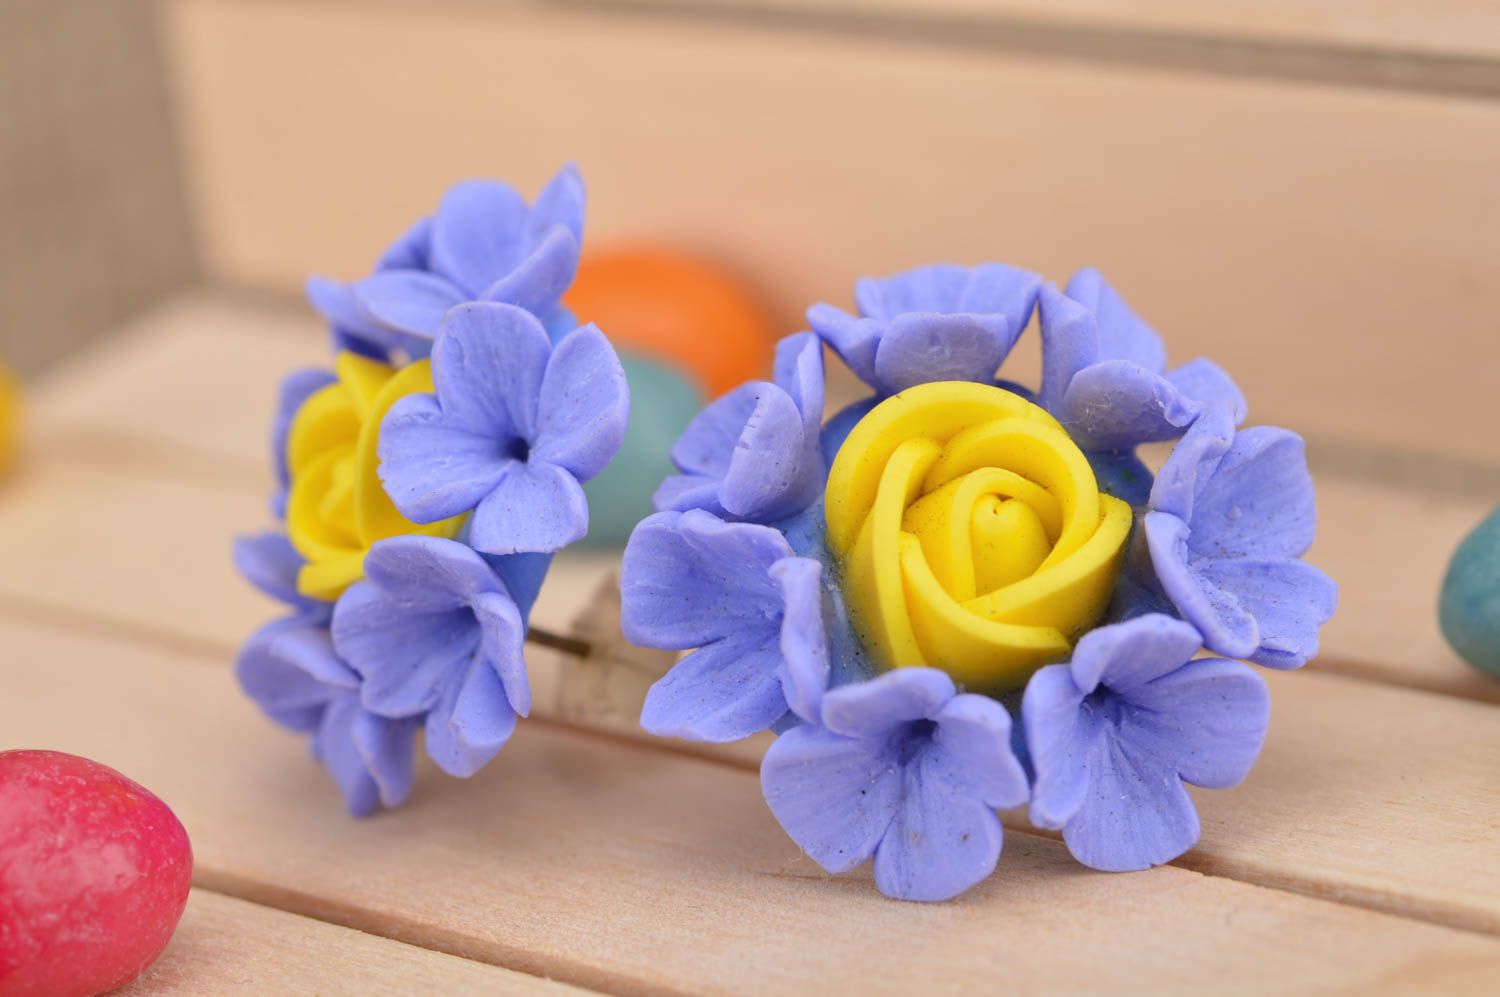 Handmade designer stud earrings with polymer clay violet and yellow flowers photo 1